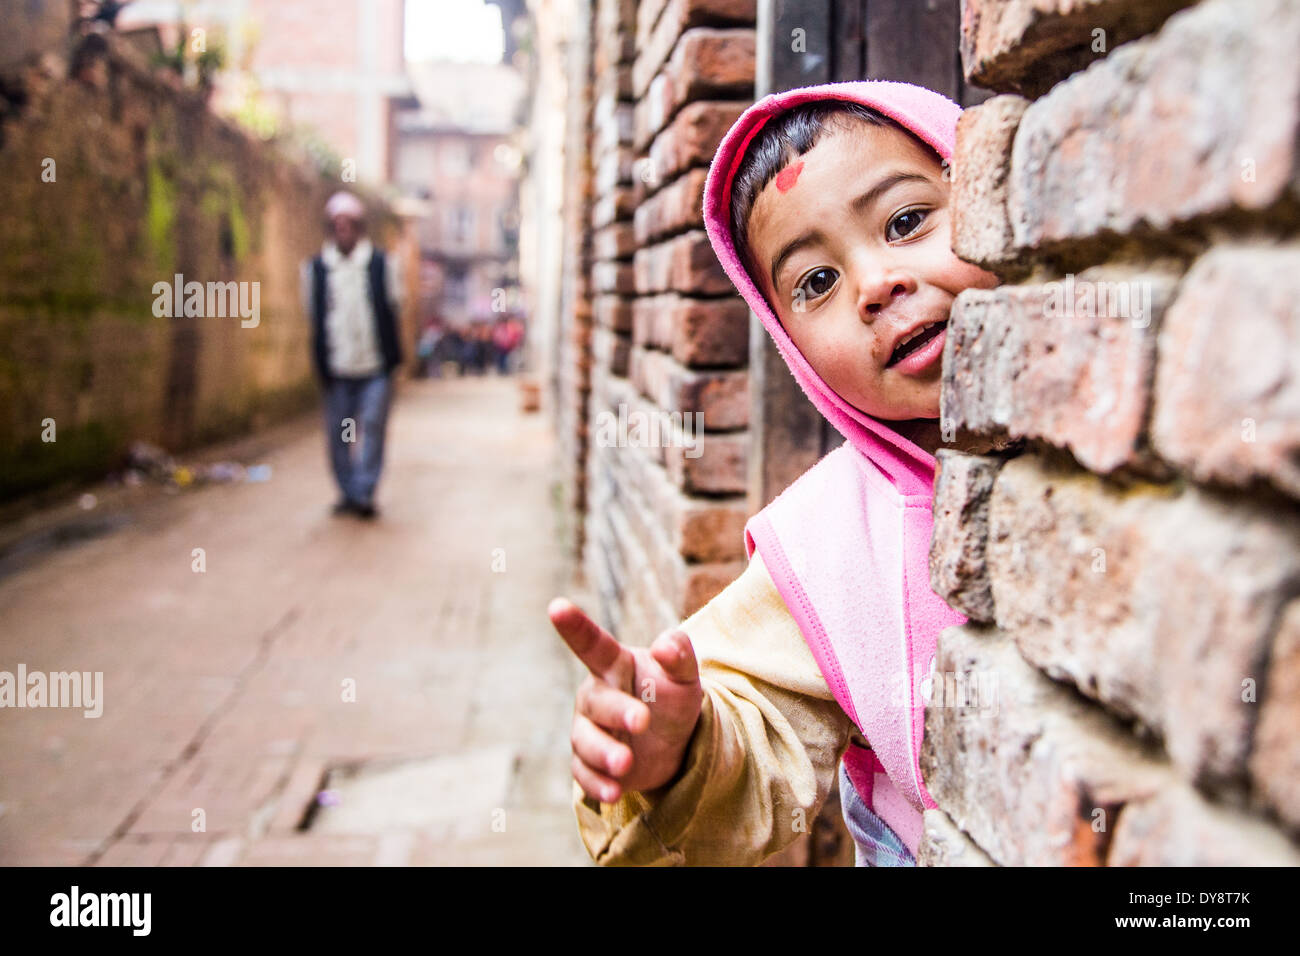 Young Napali boy in a doorway in Bhaktapur, Nepal Stock Photo